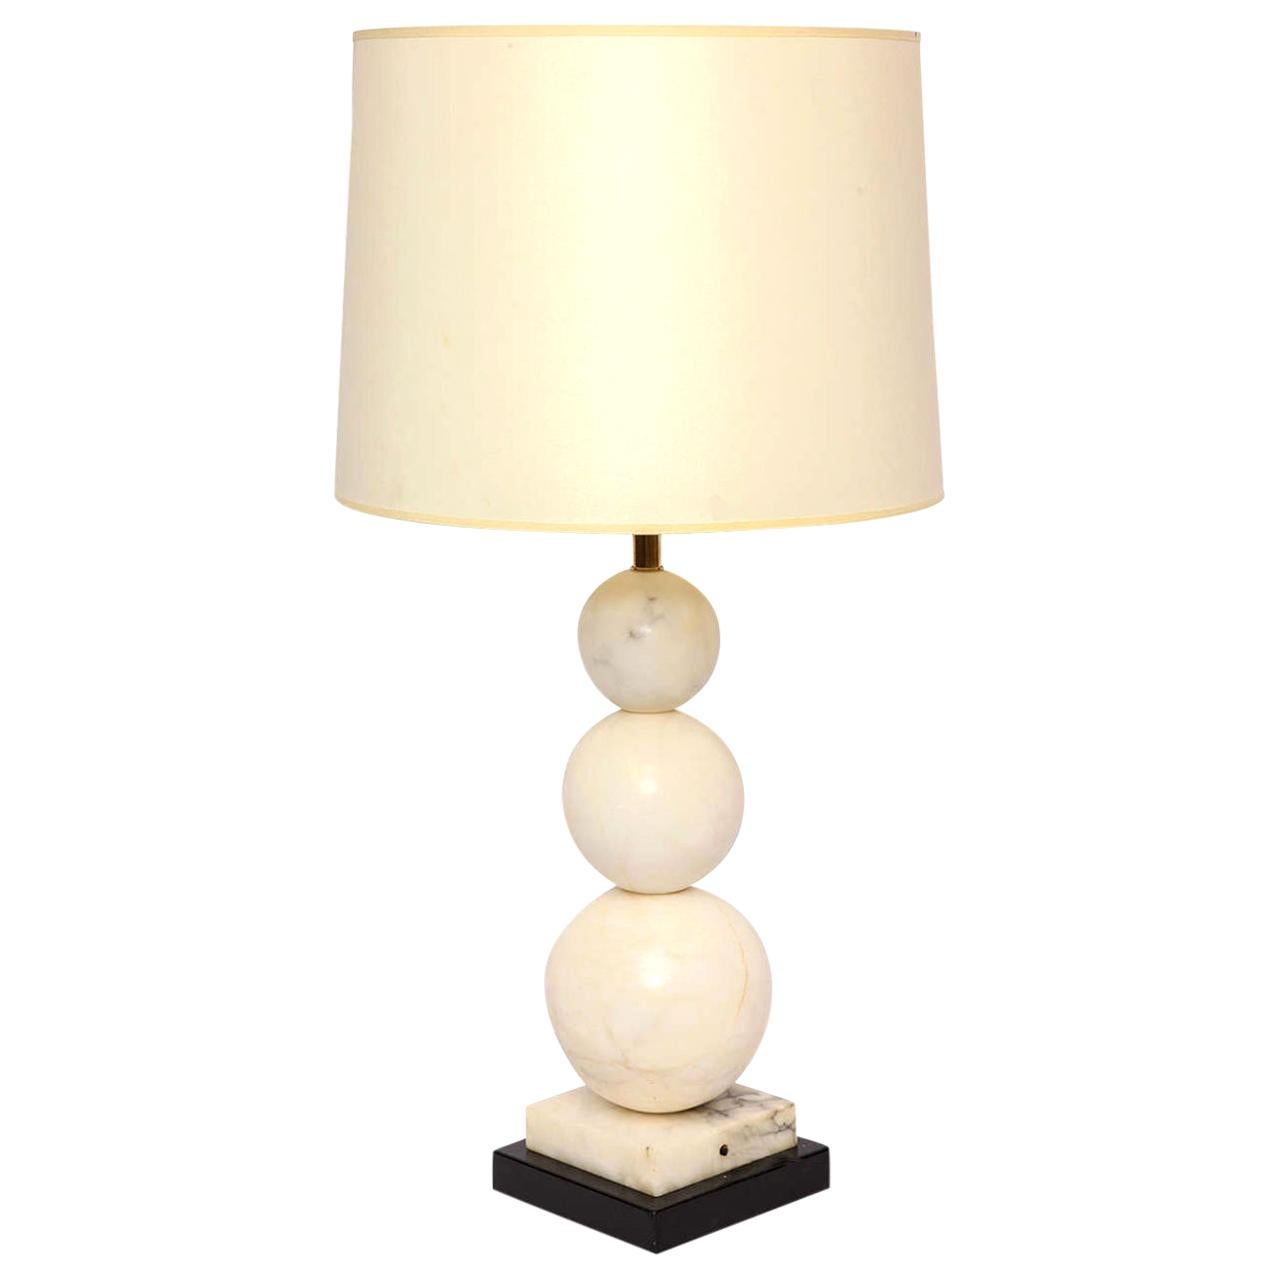 Table Lamp Mid-Century Modern Marble Cubist Spheres, Italy, 1940s For Sale